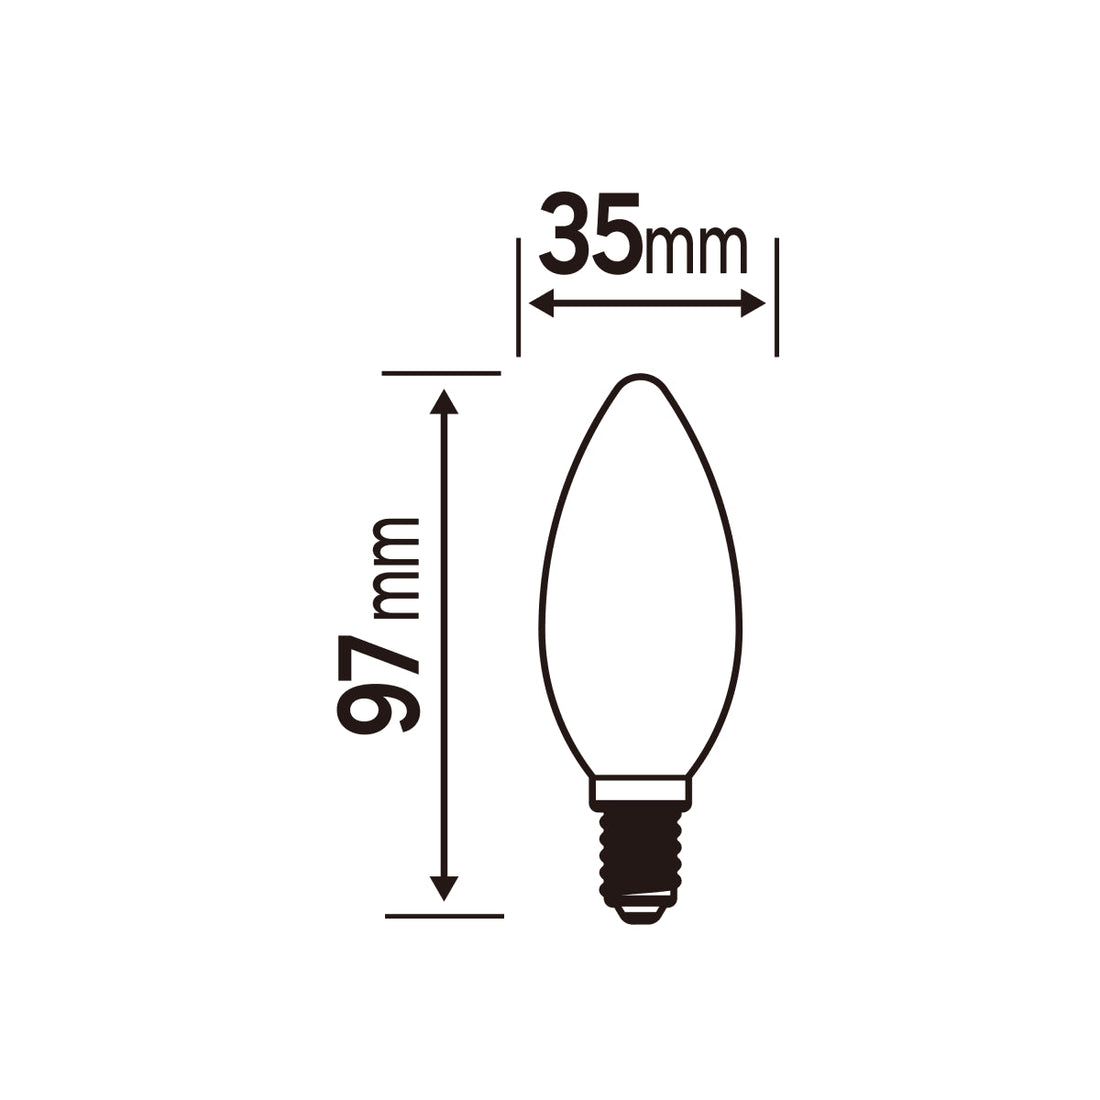 LED BULB E14=60W CANDLE FROSTED WARM LIGHT - best price from Maltashopper.com BR420007866